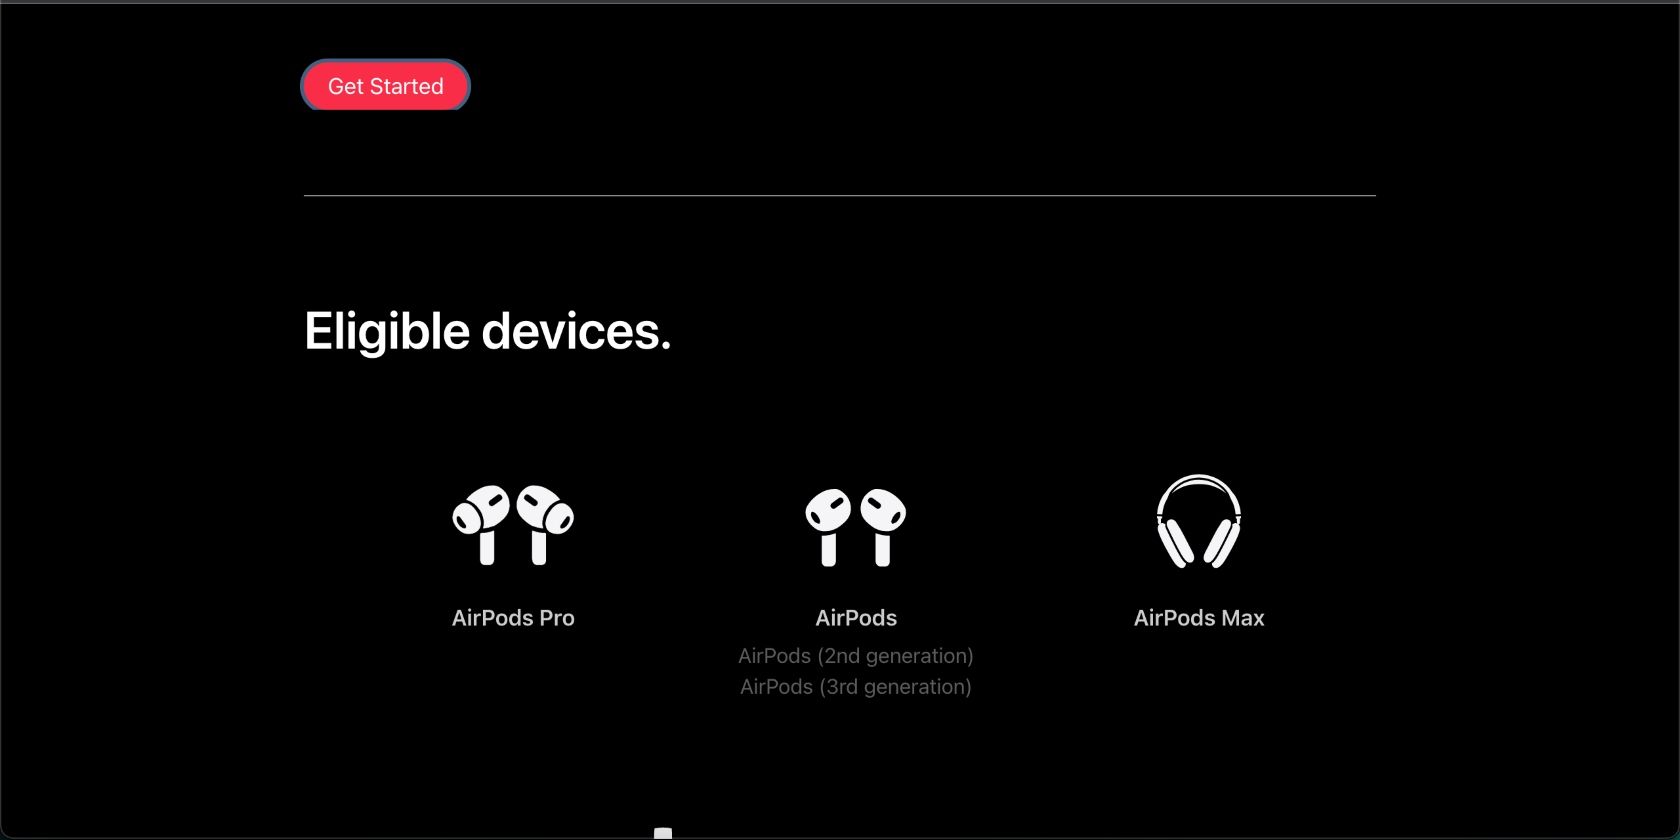 screenshot of apple music 6 month offer page